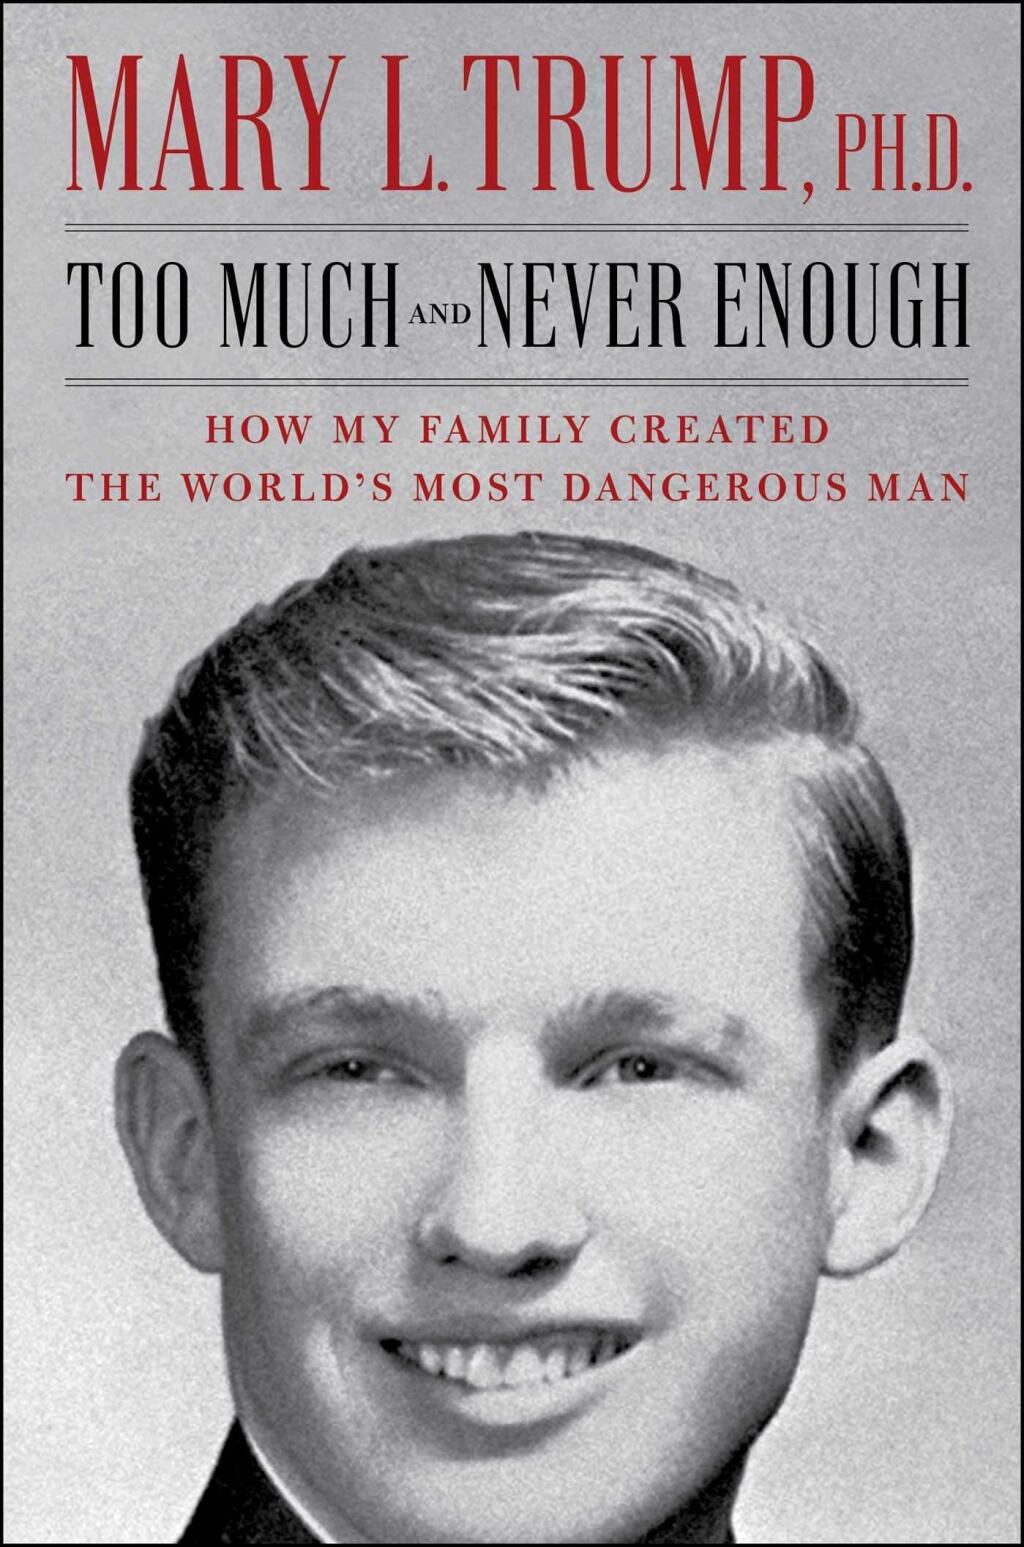 "Too Much and Never Enough," by Mary Trump, is the No. 1 bestsellling book in Petaluma.